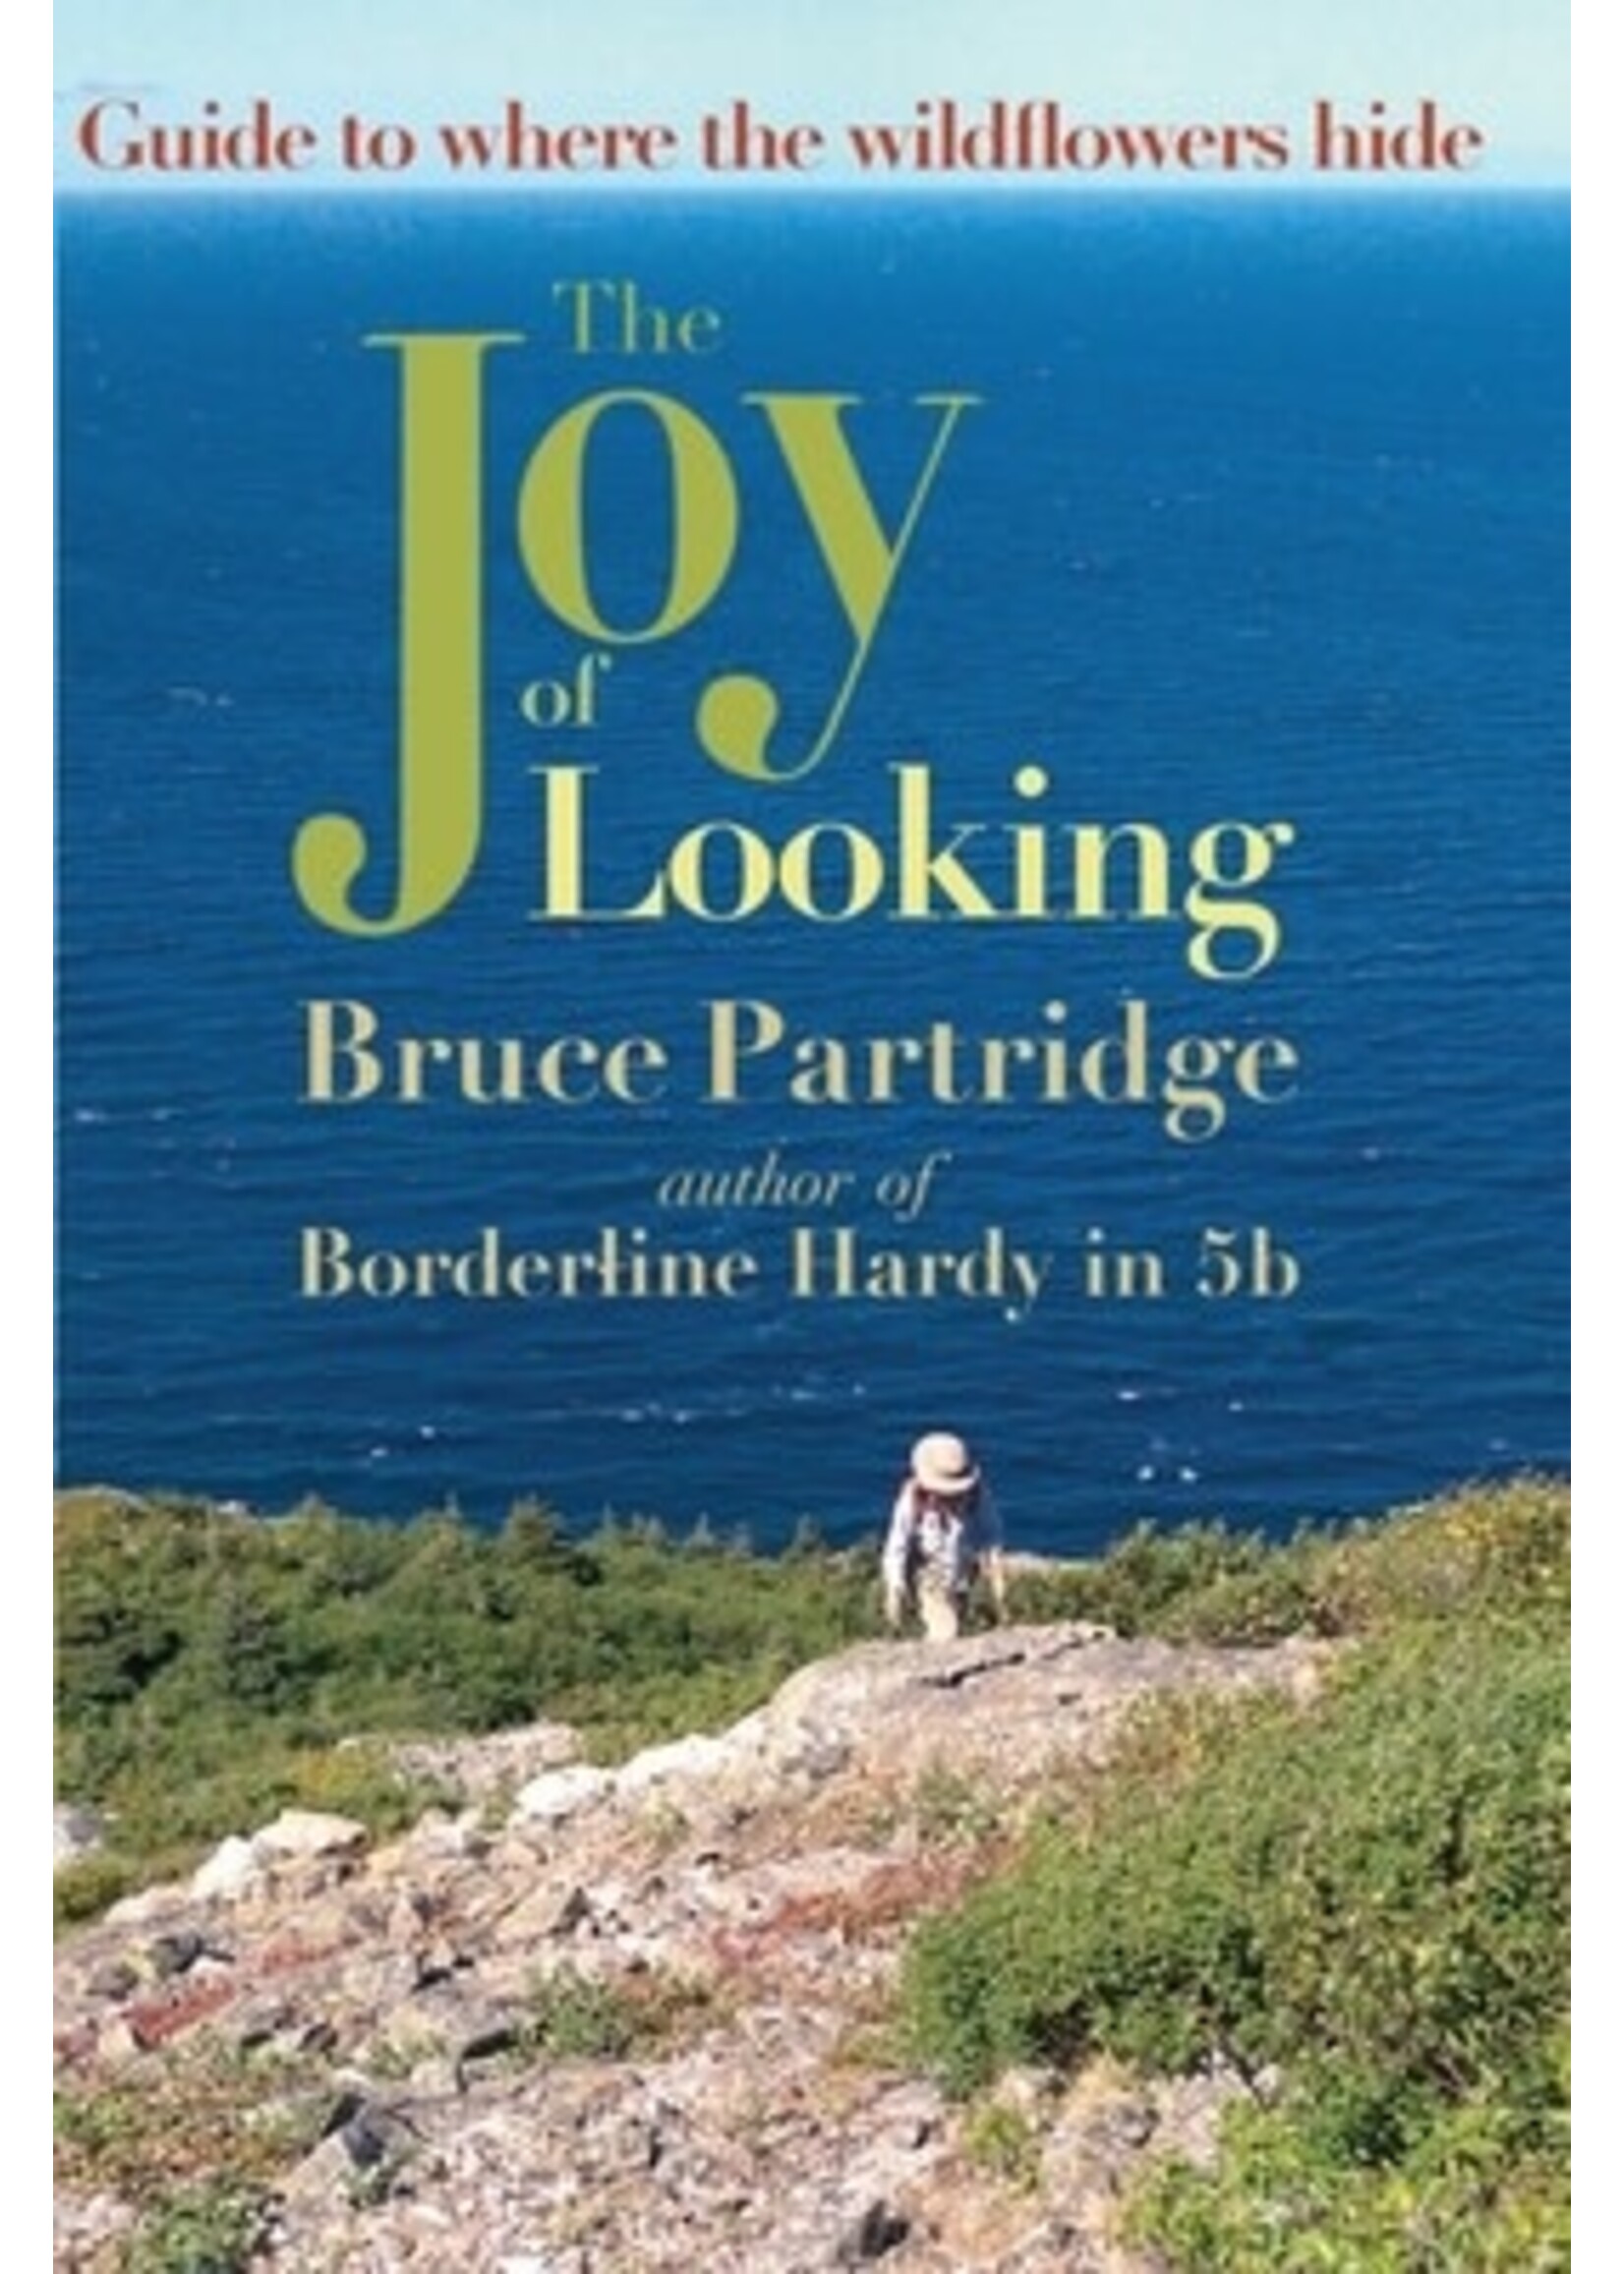 The Joy of Looking: Guide to where the wildflowers hide by Bruce Partridge